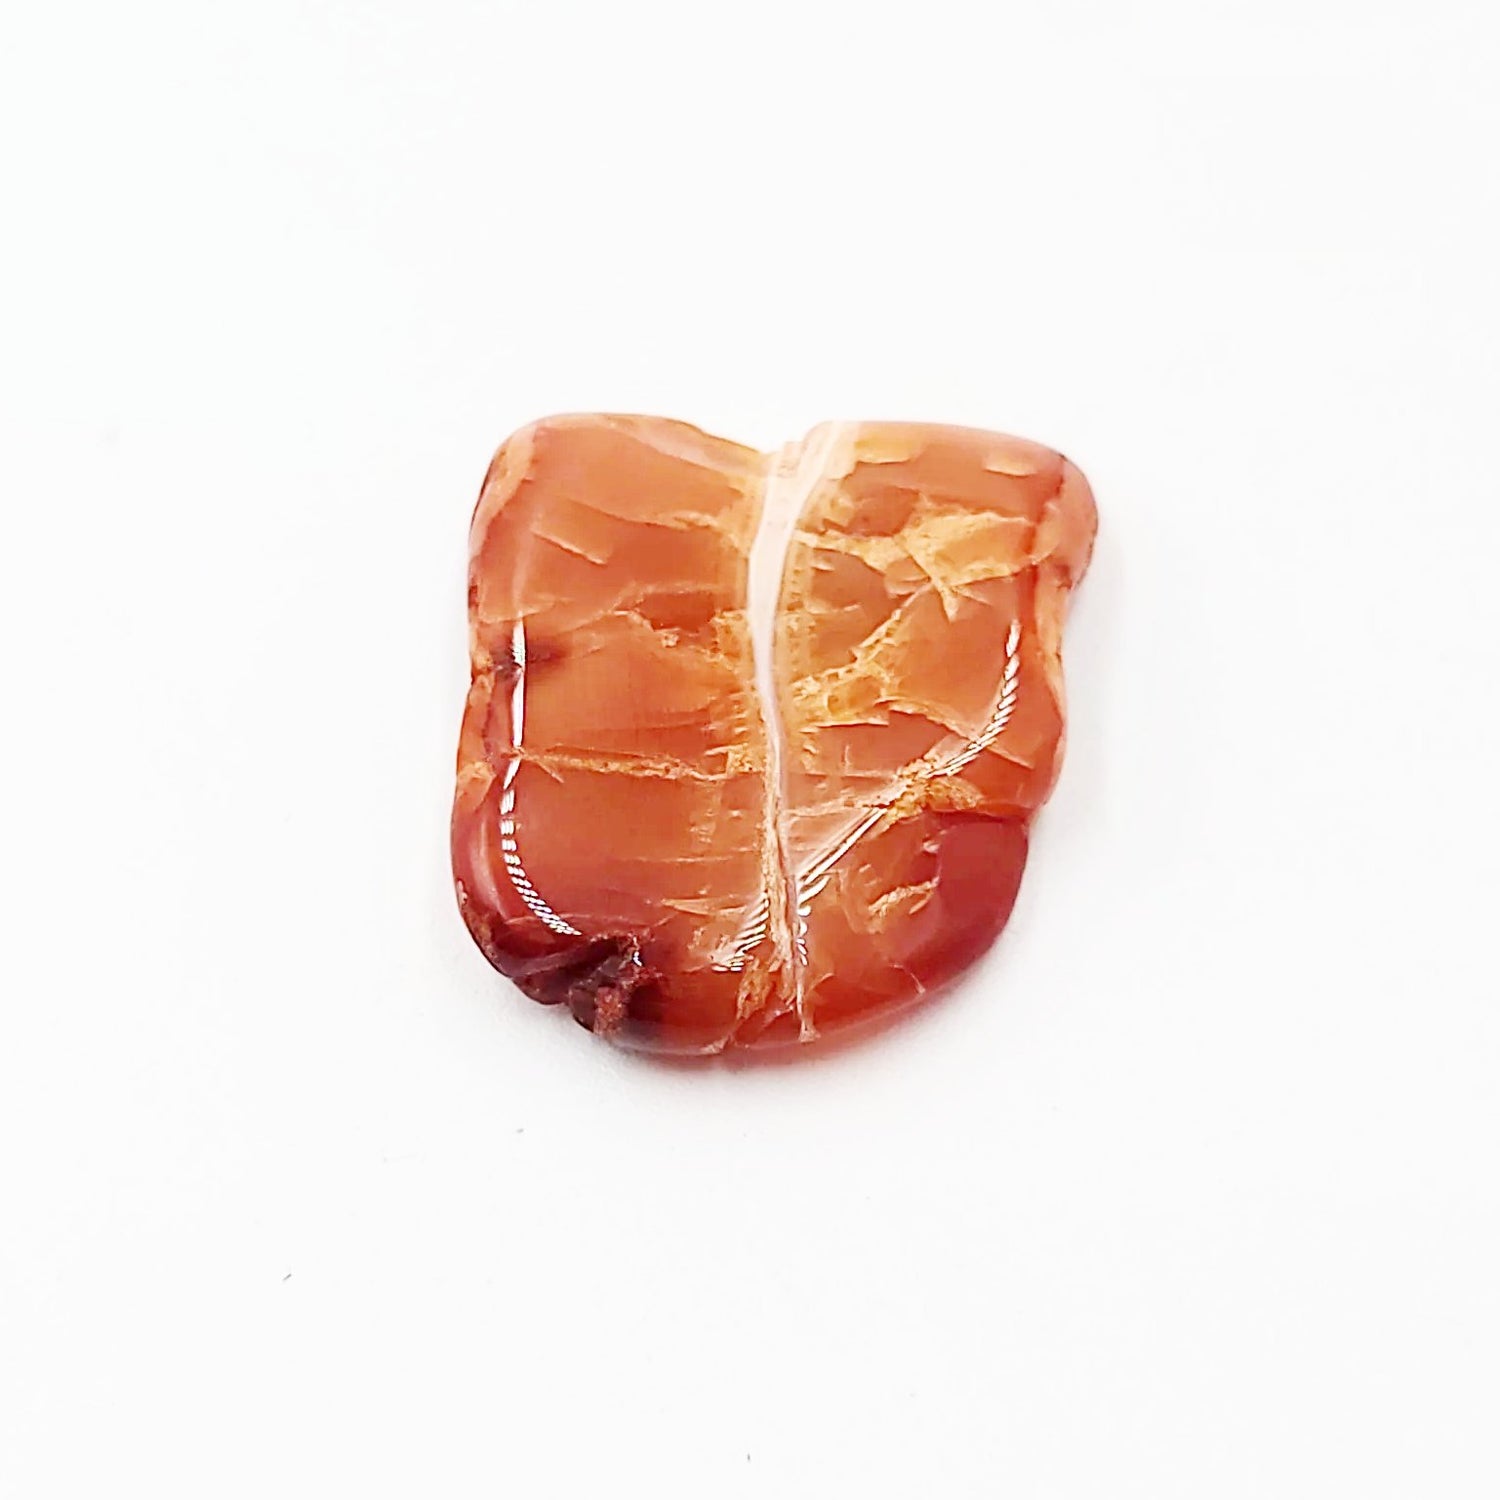 Carnelian Cabochon Free Form "Small" Polished Cut Stone - Elevated Metaphysical